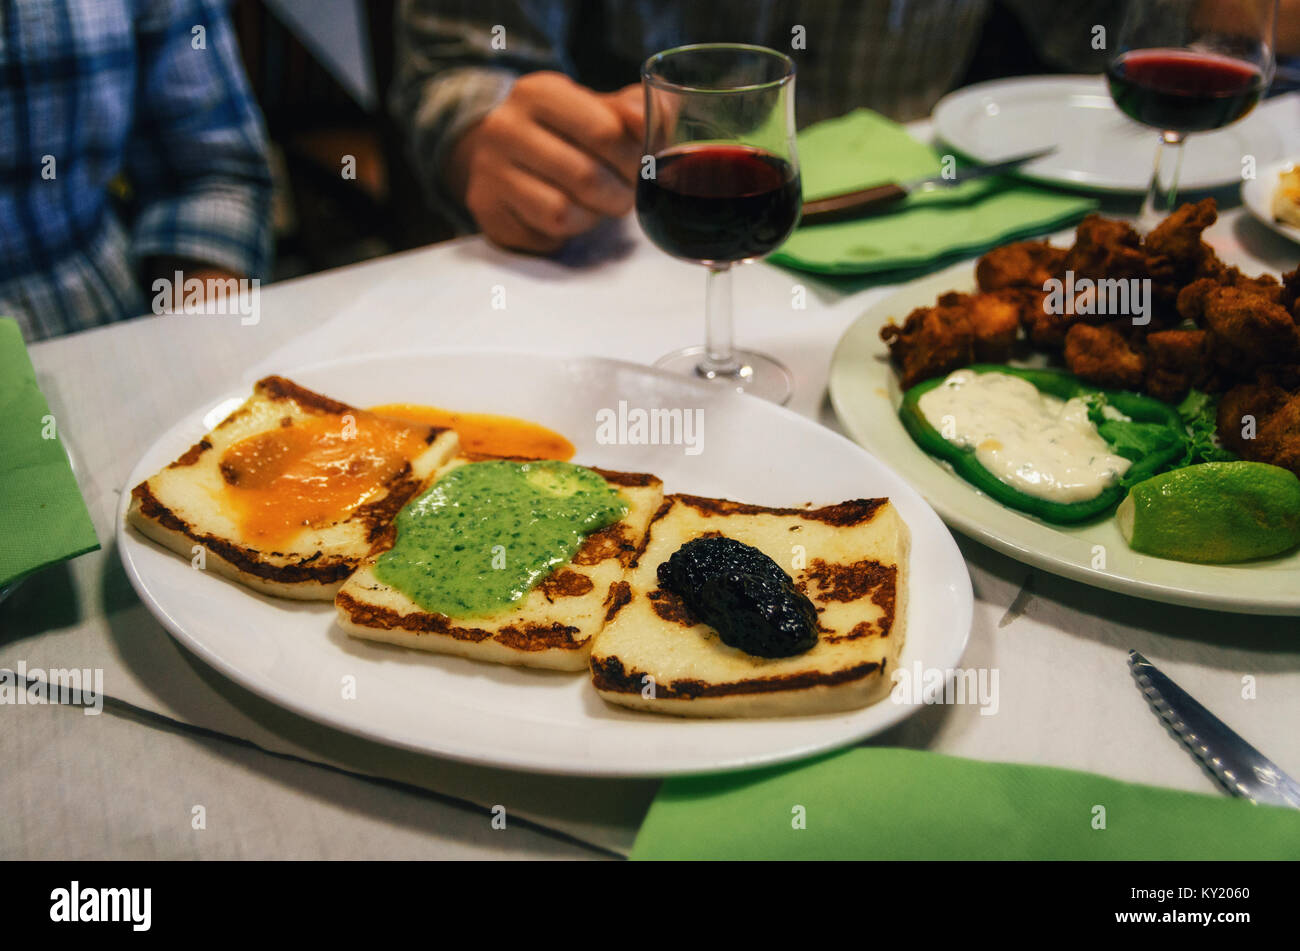 Traditional tapas plate with grilled cheese with canarian sauces mojo rojo, mojo verde and alioli, and glasses of red wine on background, Tenerife, Ca Stock Photo